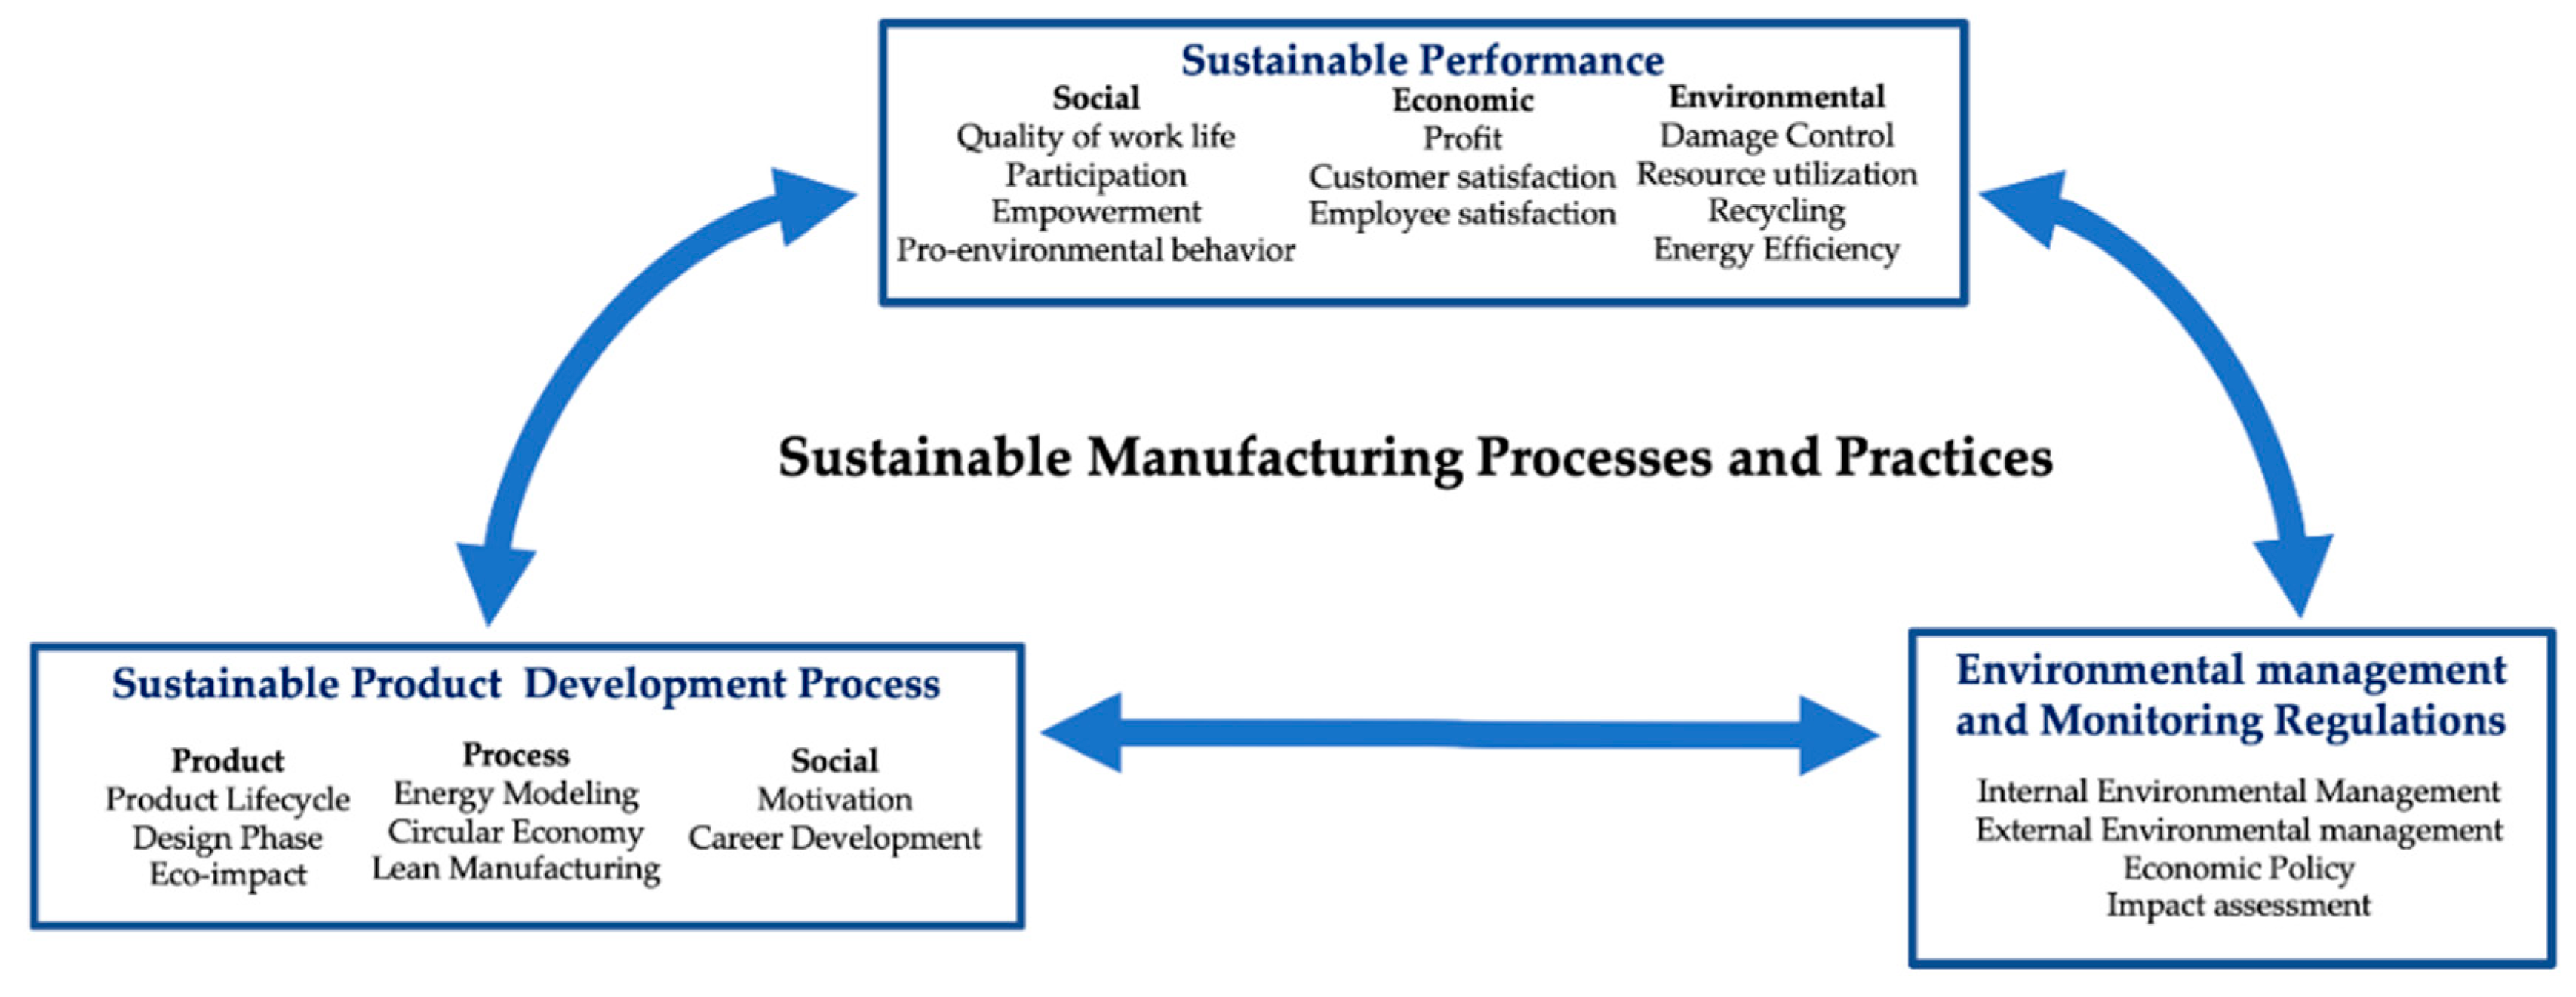 Sustainability Free Full Text Classifications Of Sustainable Manufacturing Practices In Asean Region A Systematic Review And Bibliometric Analysis Of The Past Decade Of Research Html